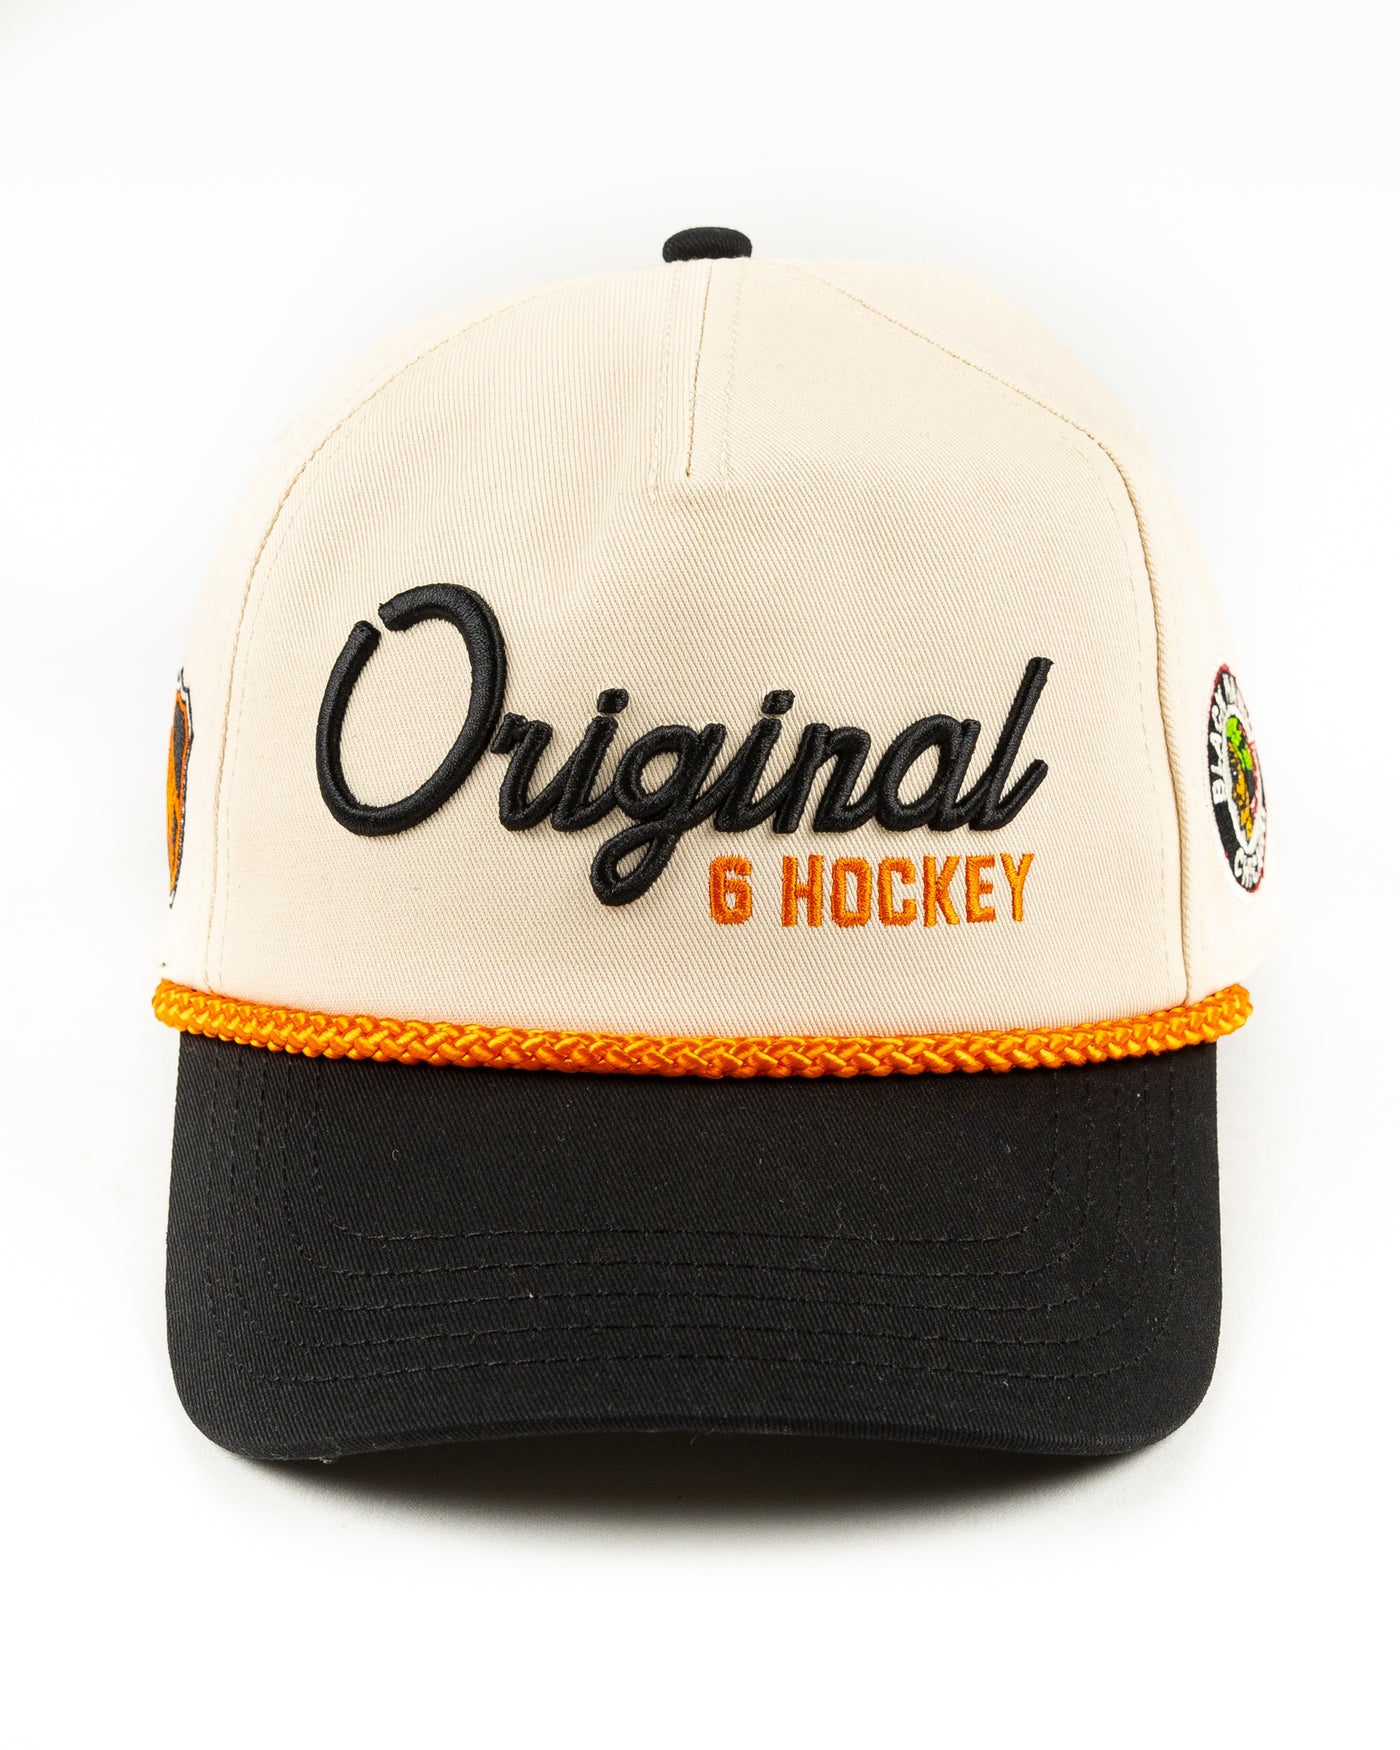 beige, black and orange snapback rope hat with Original Six hockey word graphic across front and vintage Chicago Blackhawks logo embroidered on left side - front lay flat